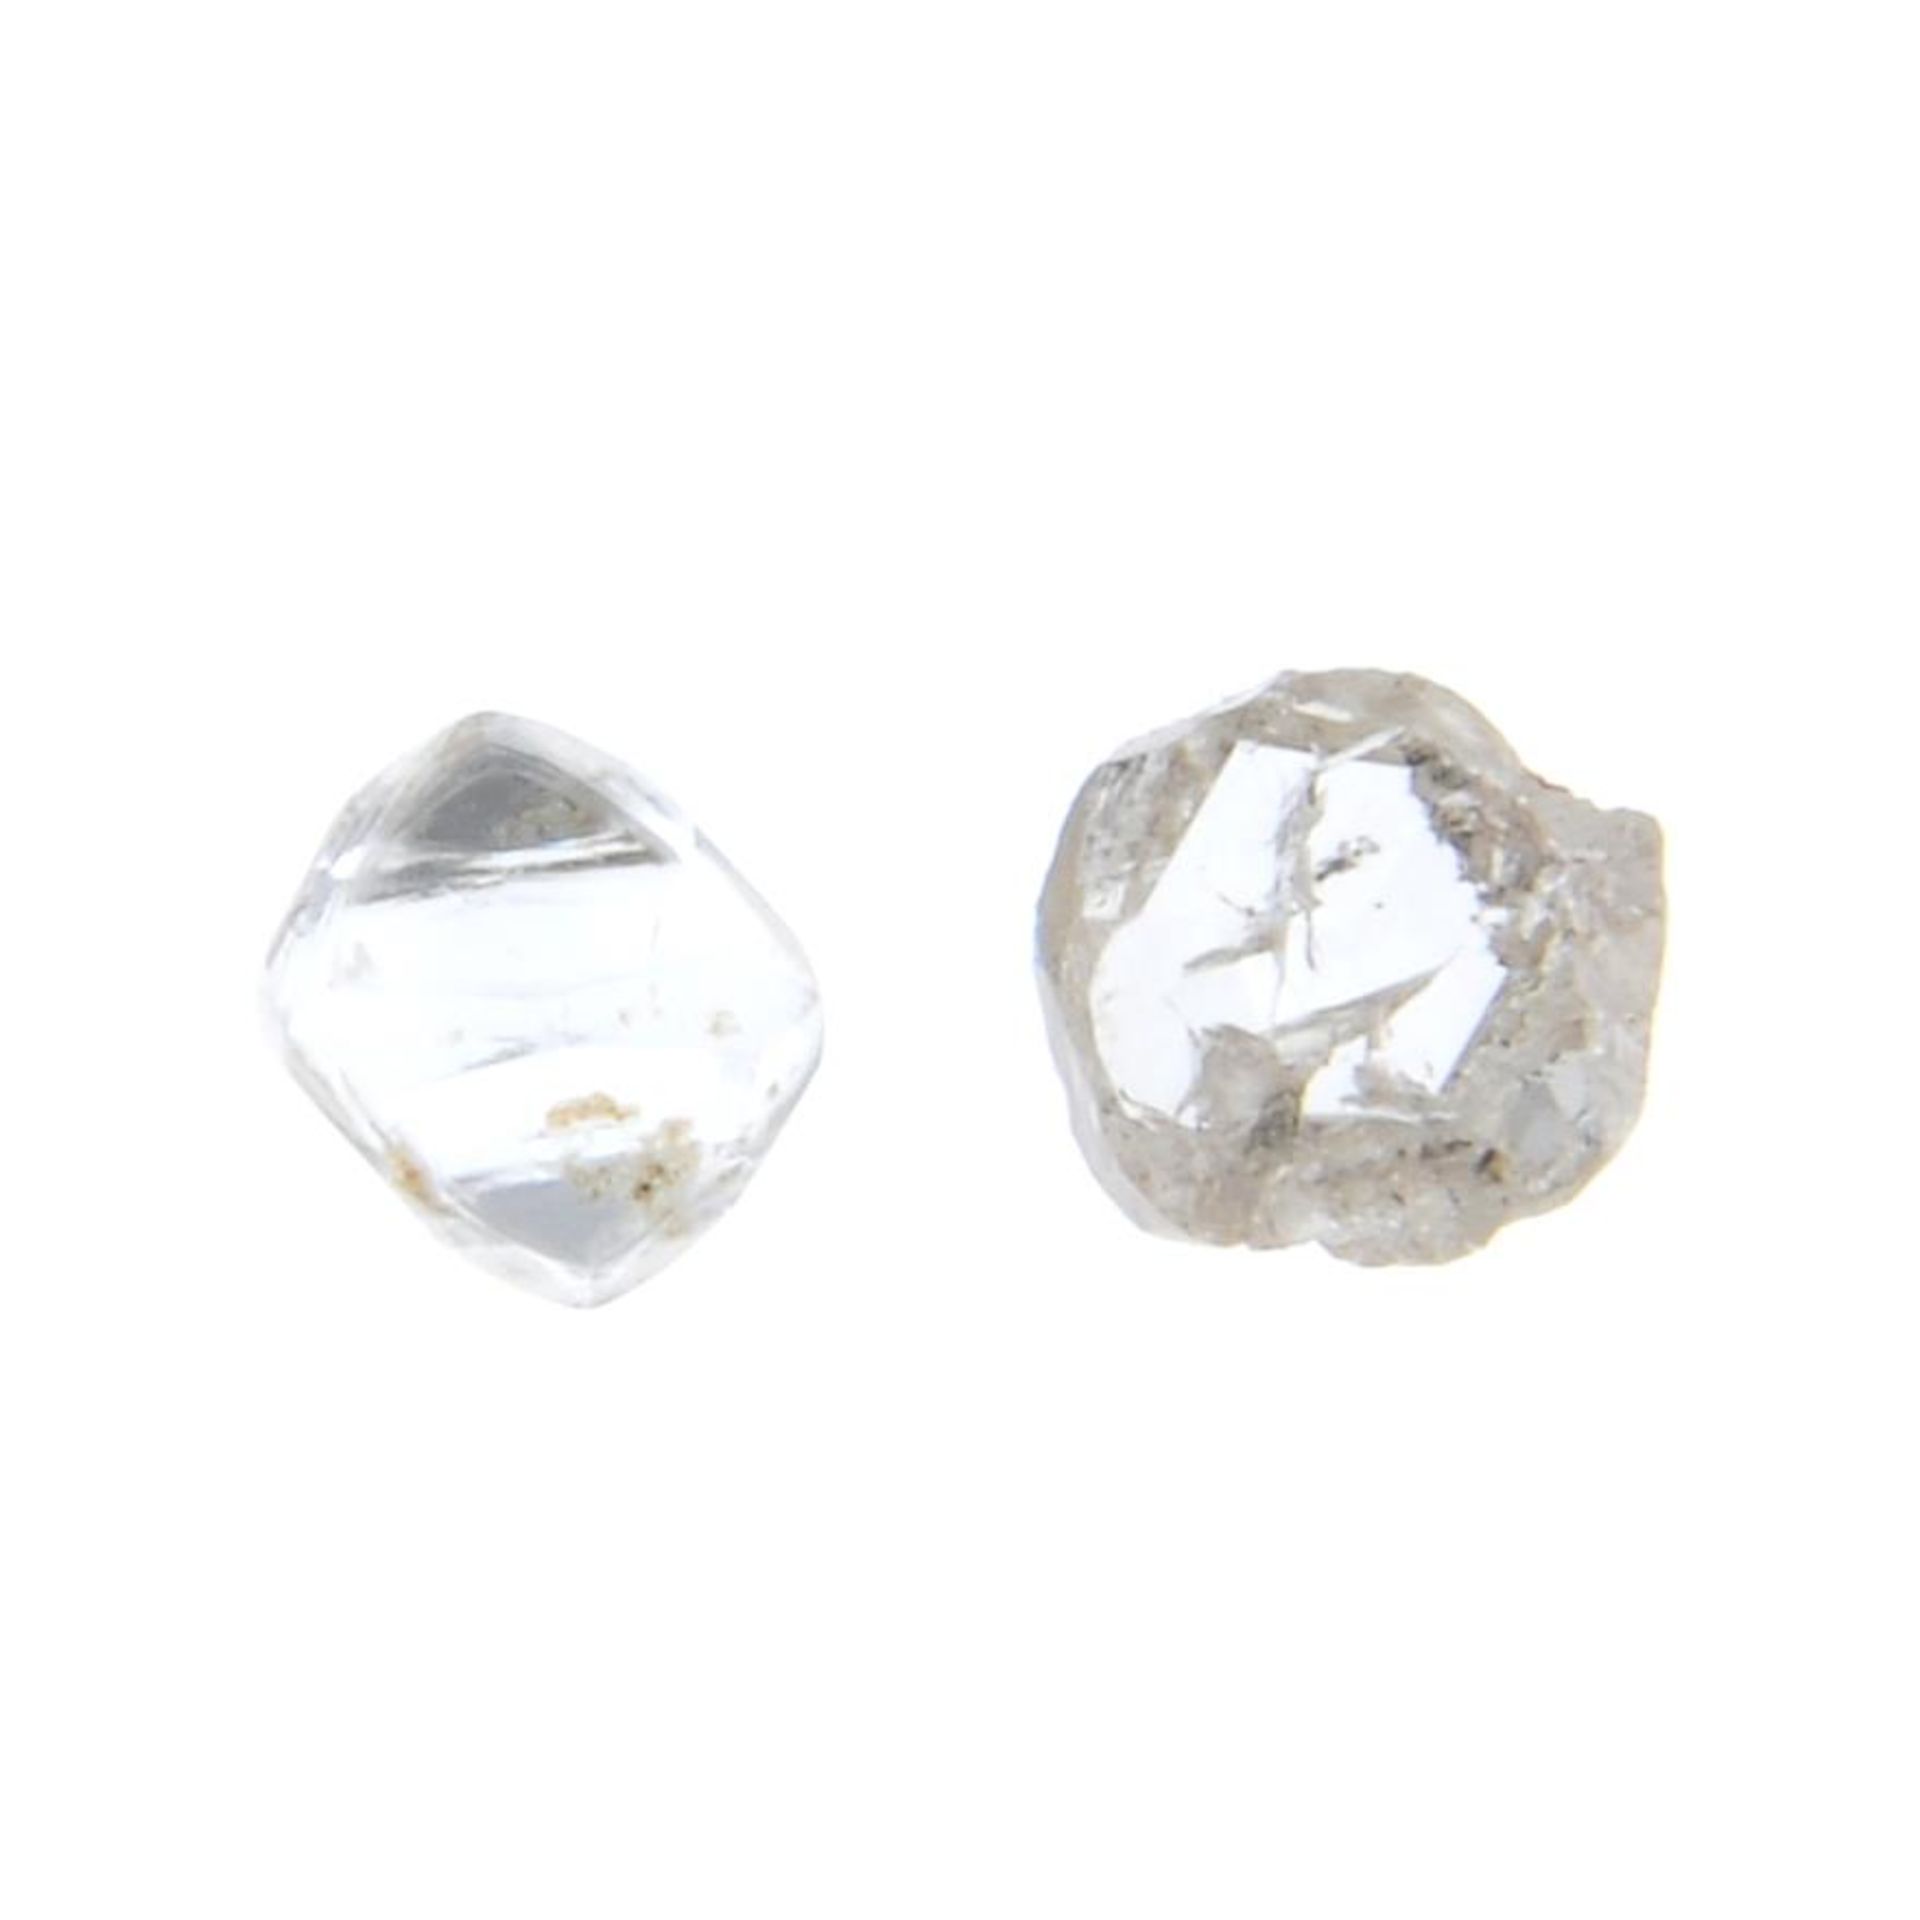 Two loose diamond crystals,